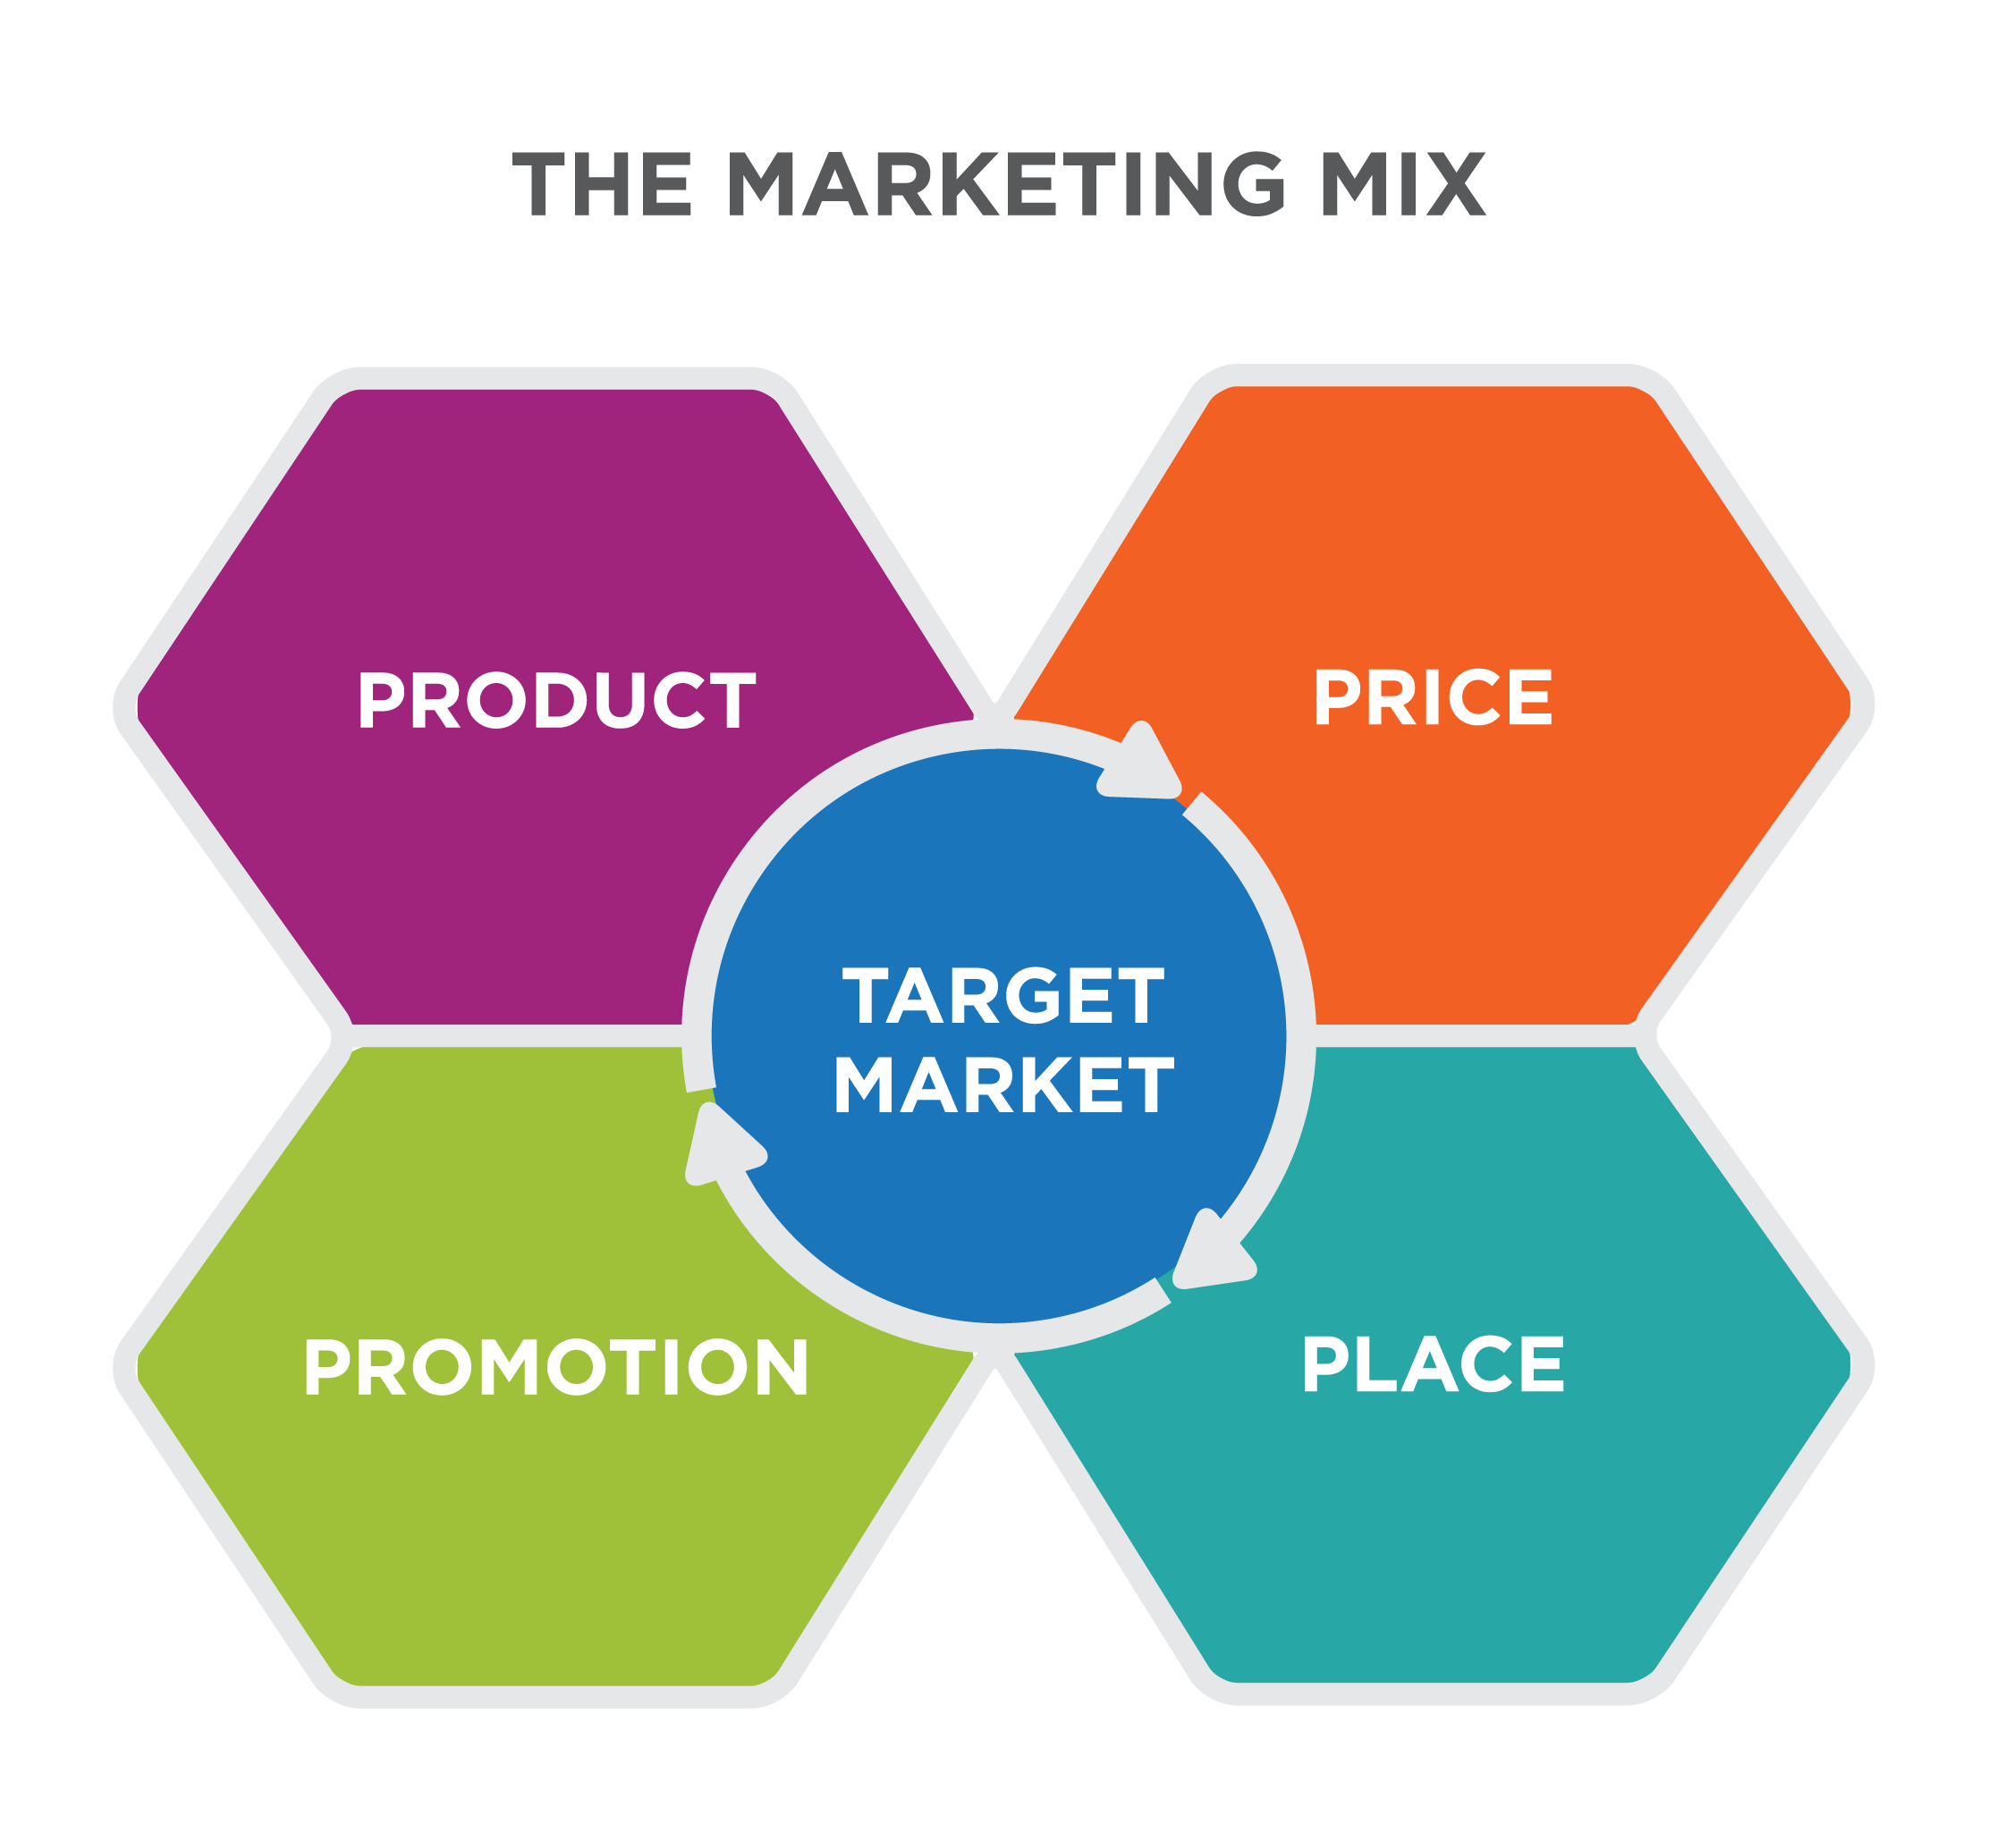 The Marketing Mix 1. Target Market is surrounded by the four Ps: Product, Price Promotion, and Place.